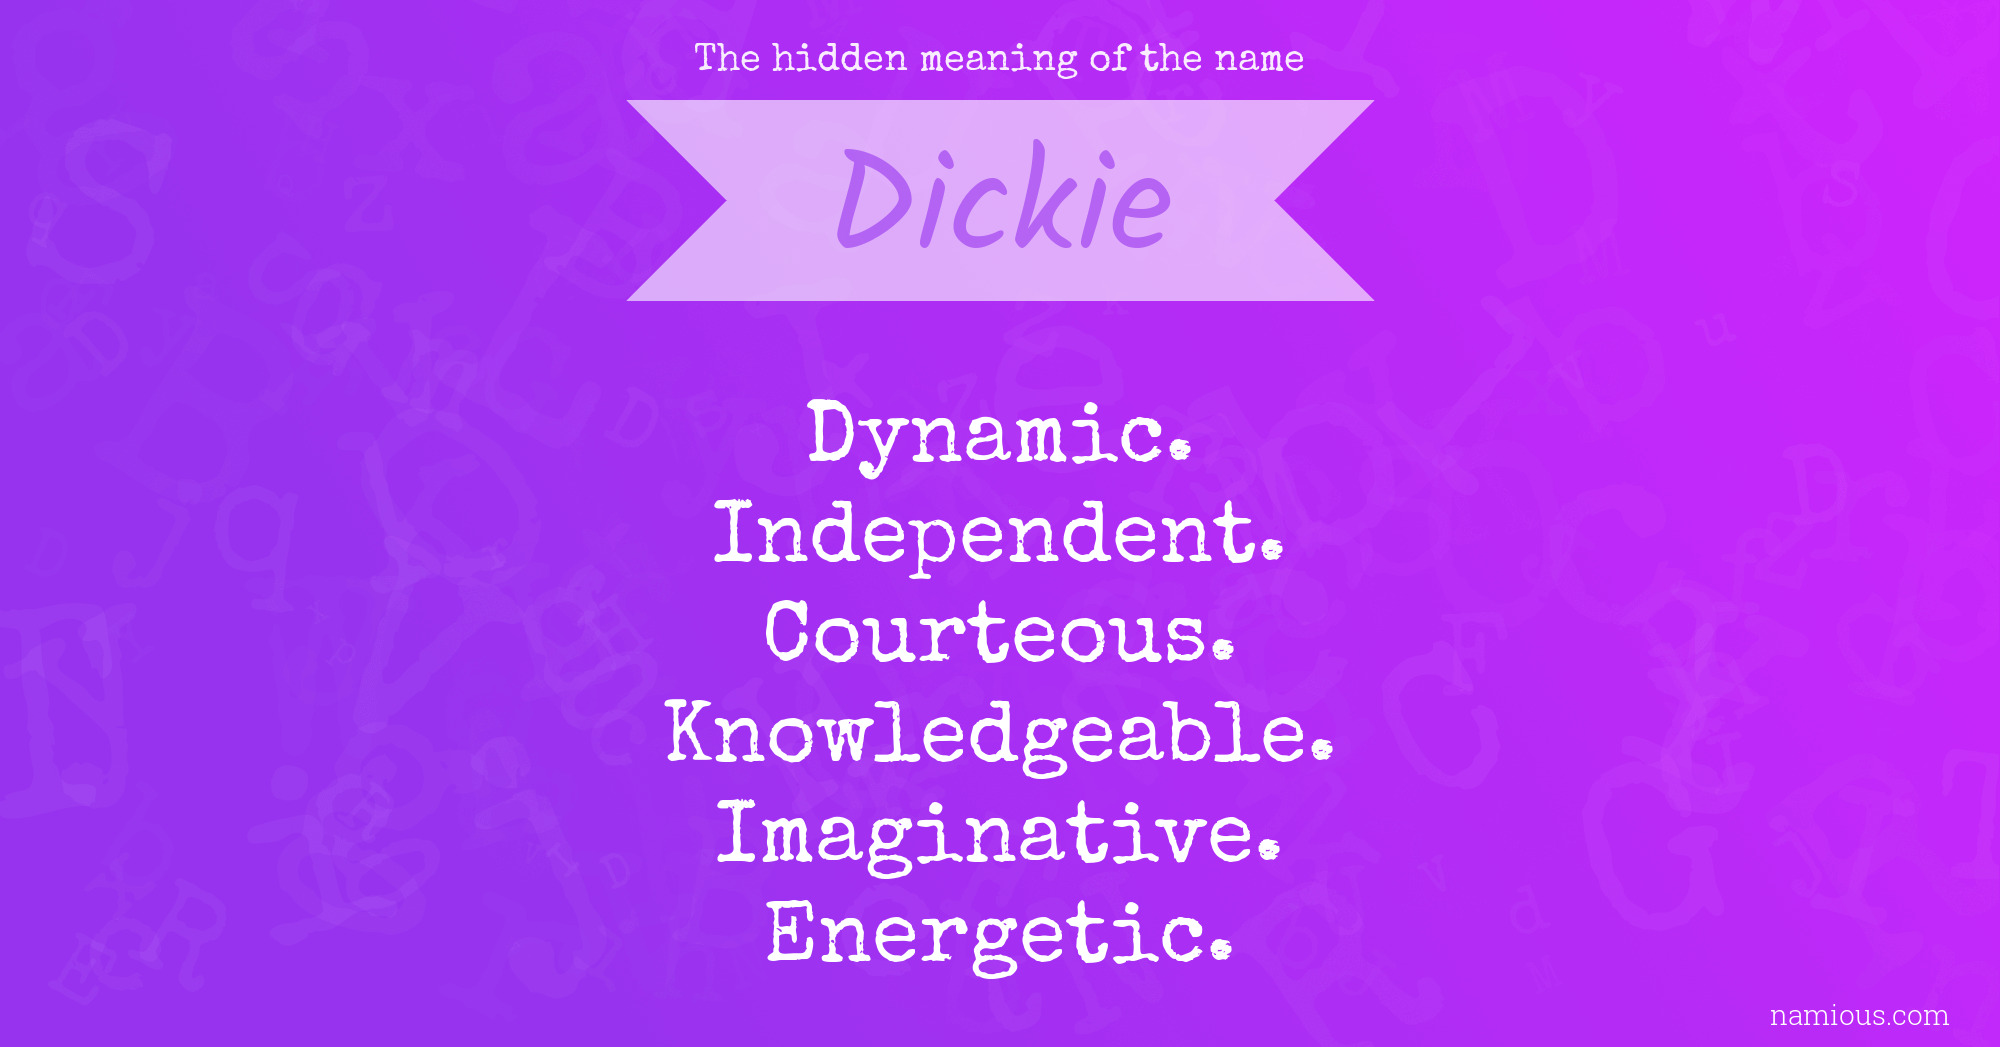 The hidden meaning of the name Dickie